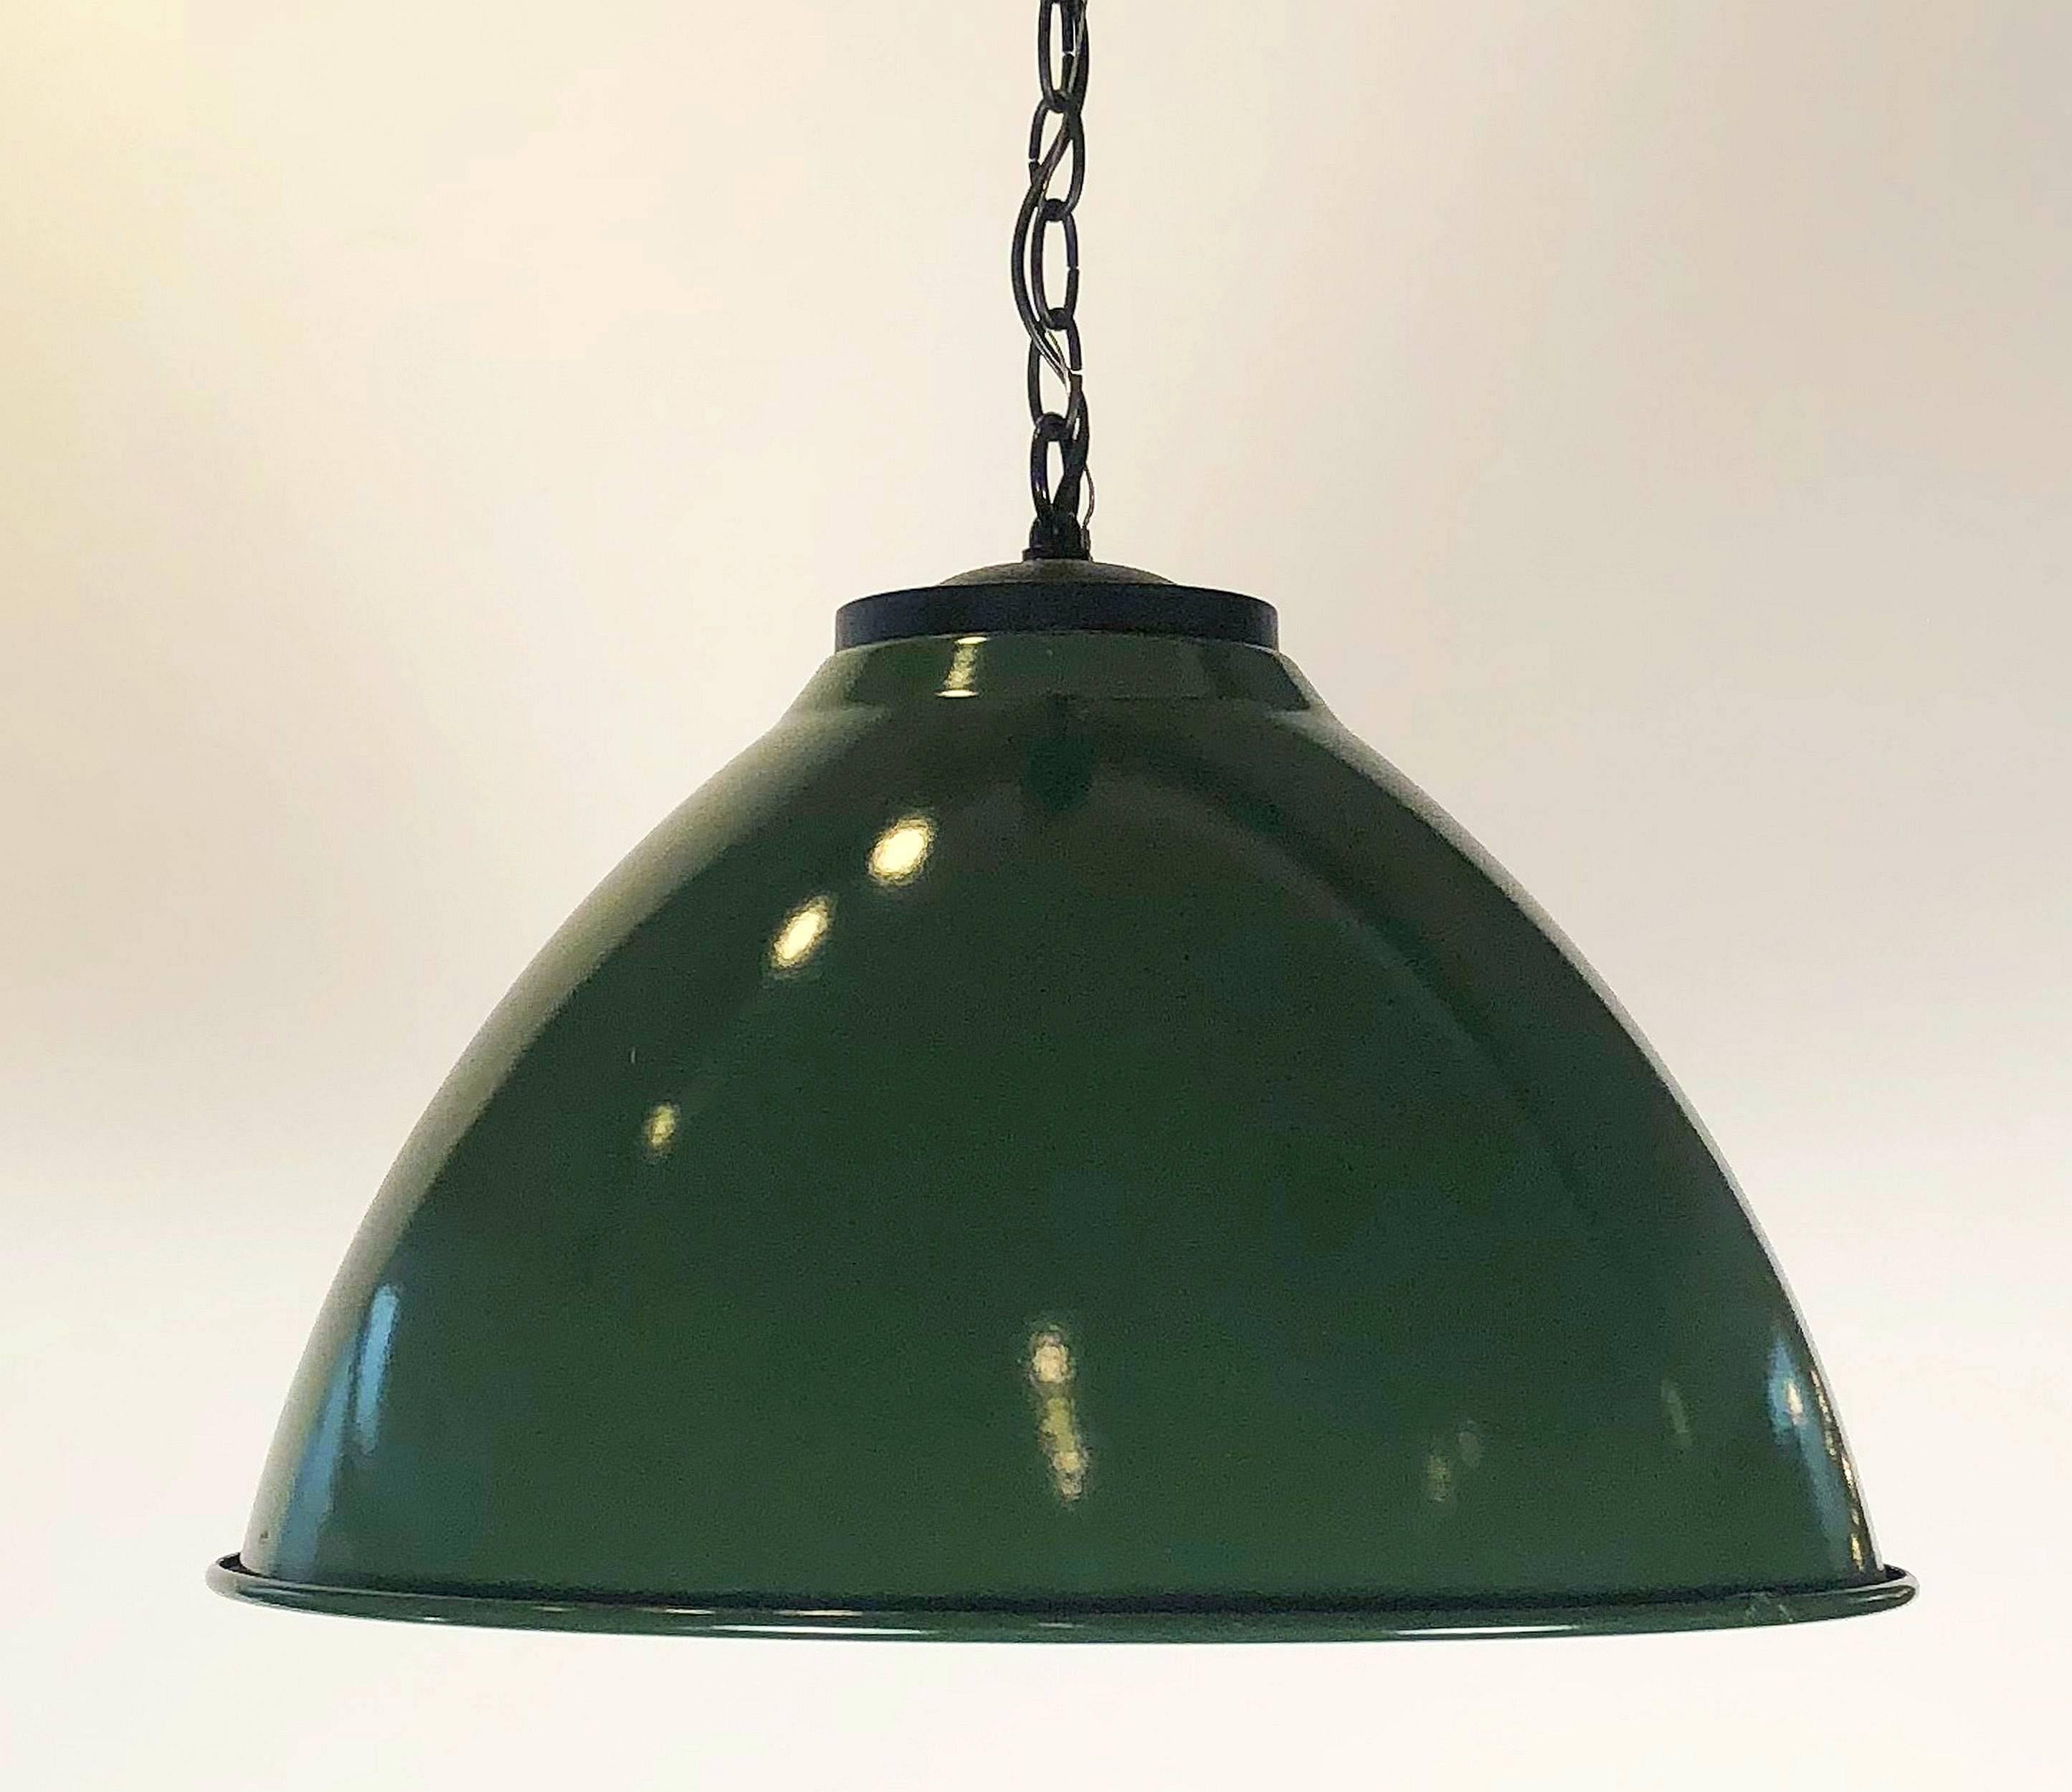 English Green Tole Industrial Hanging Lamps or Lanterns from England (18 1/4